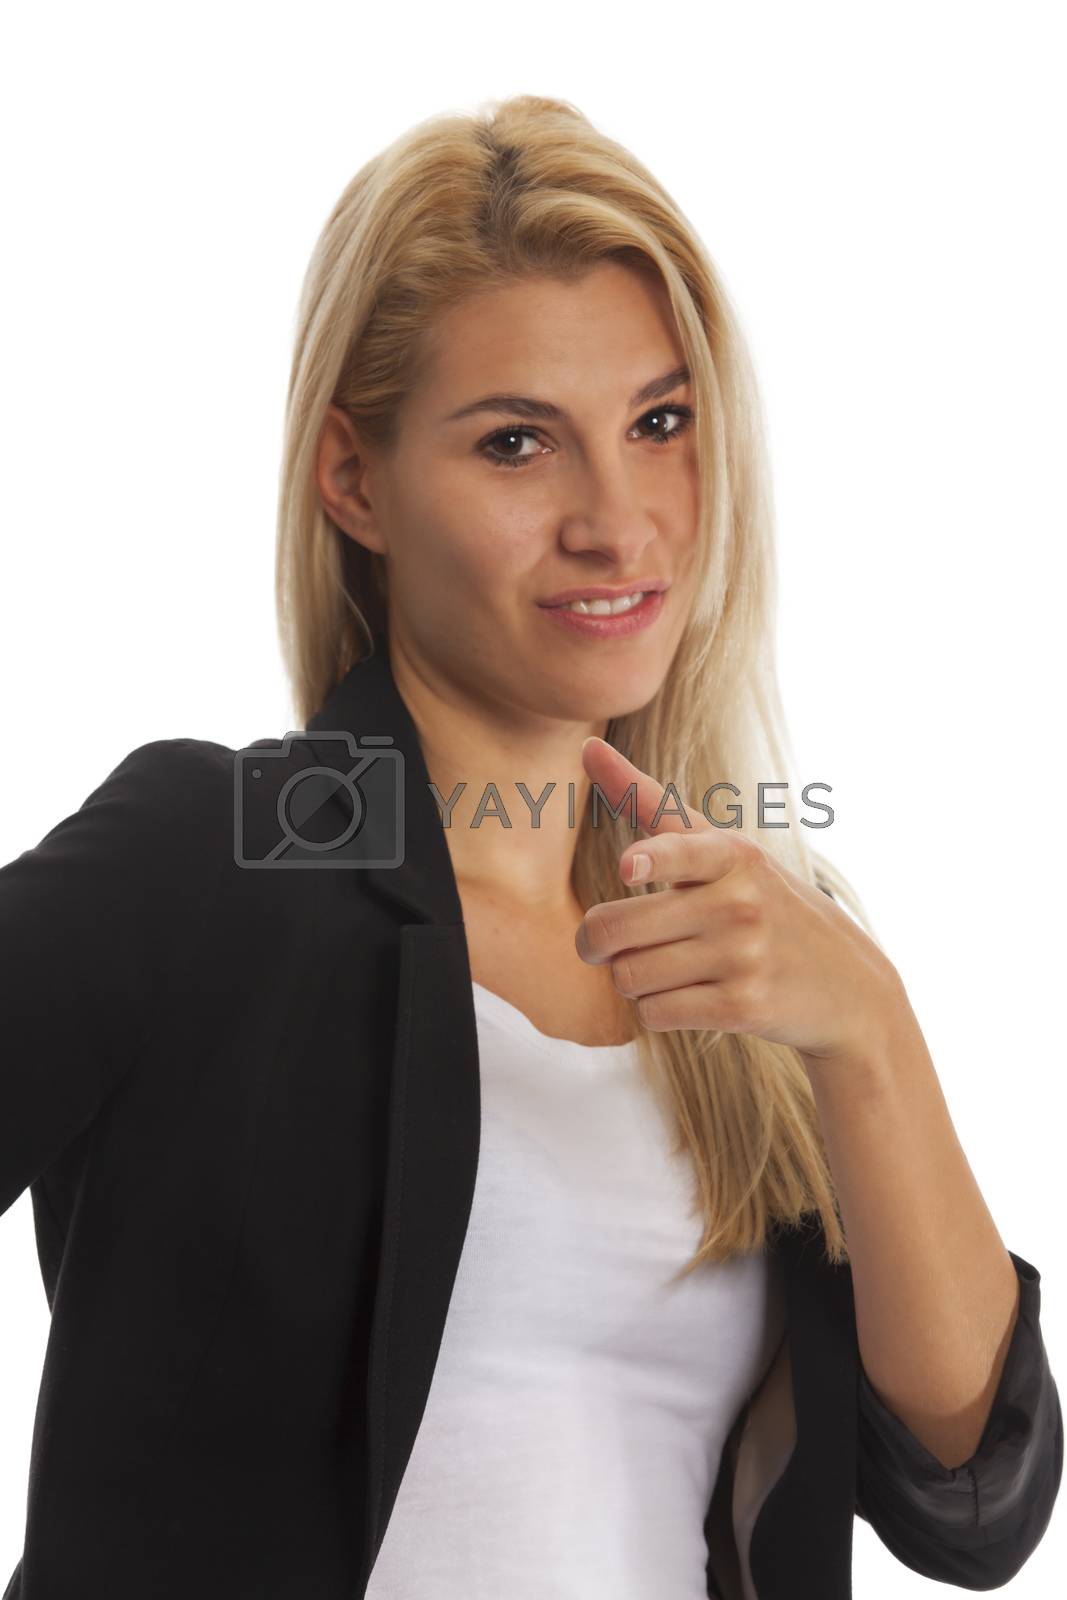 Royalty free image of attractive young blonde woman on white background by bernjuer